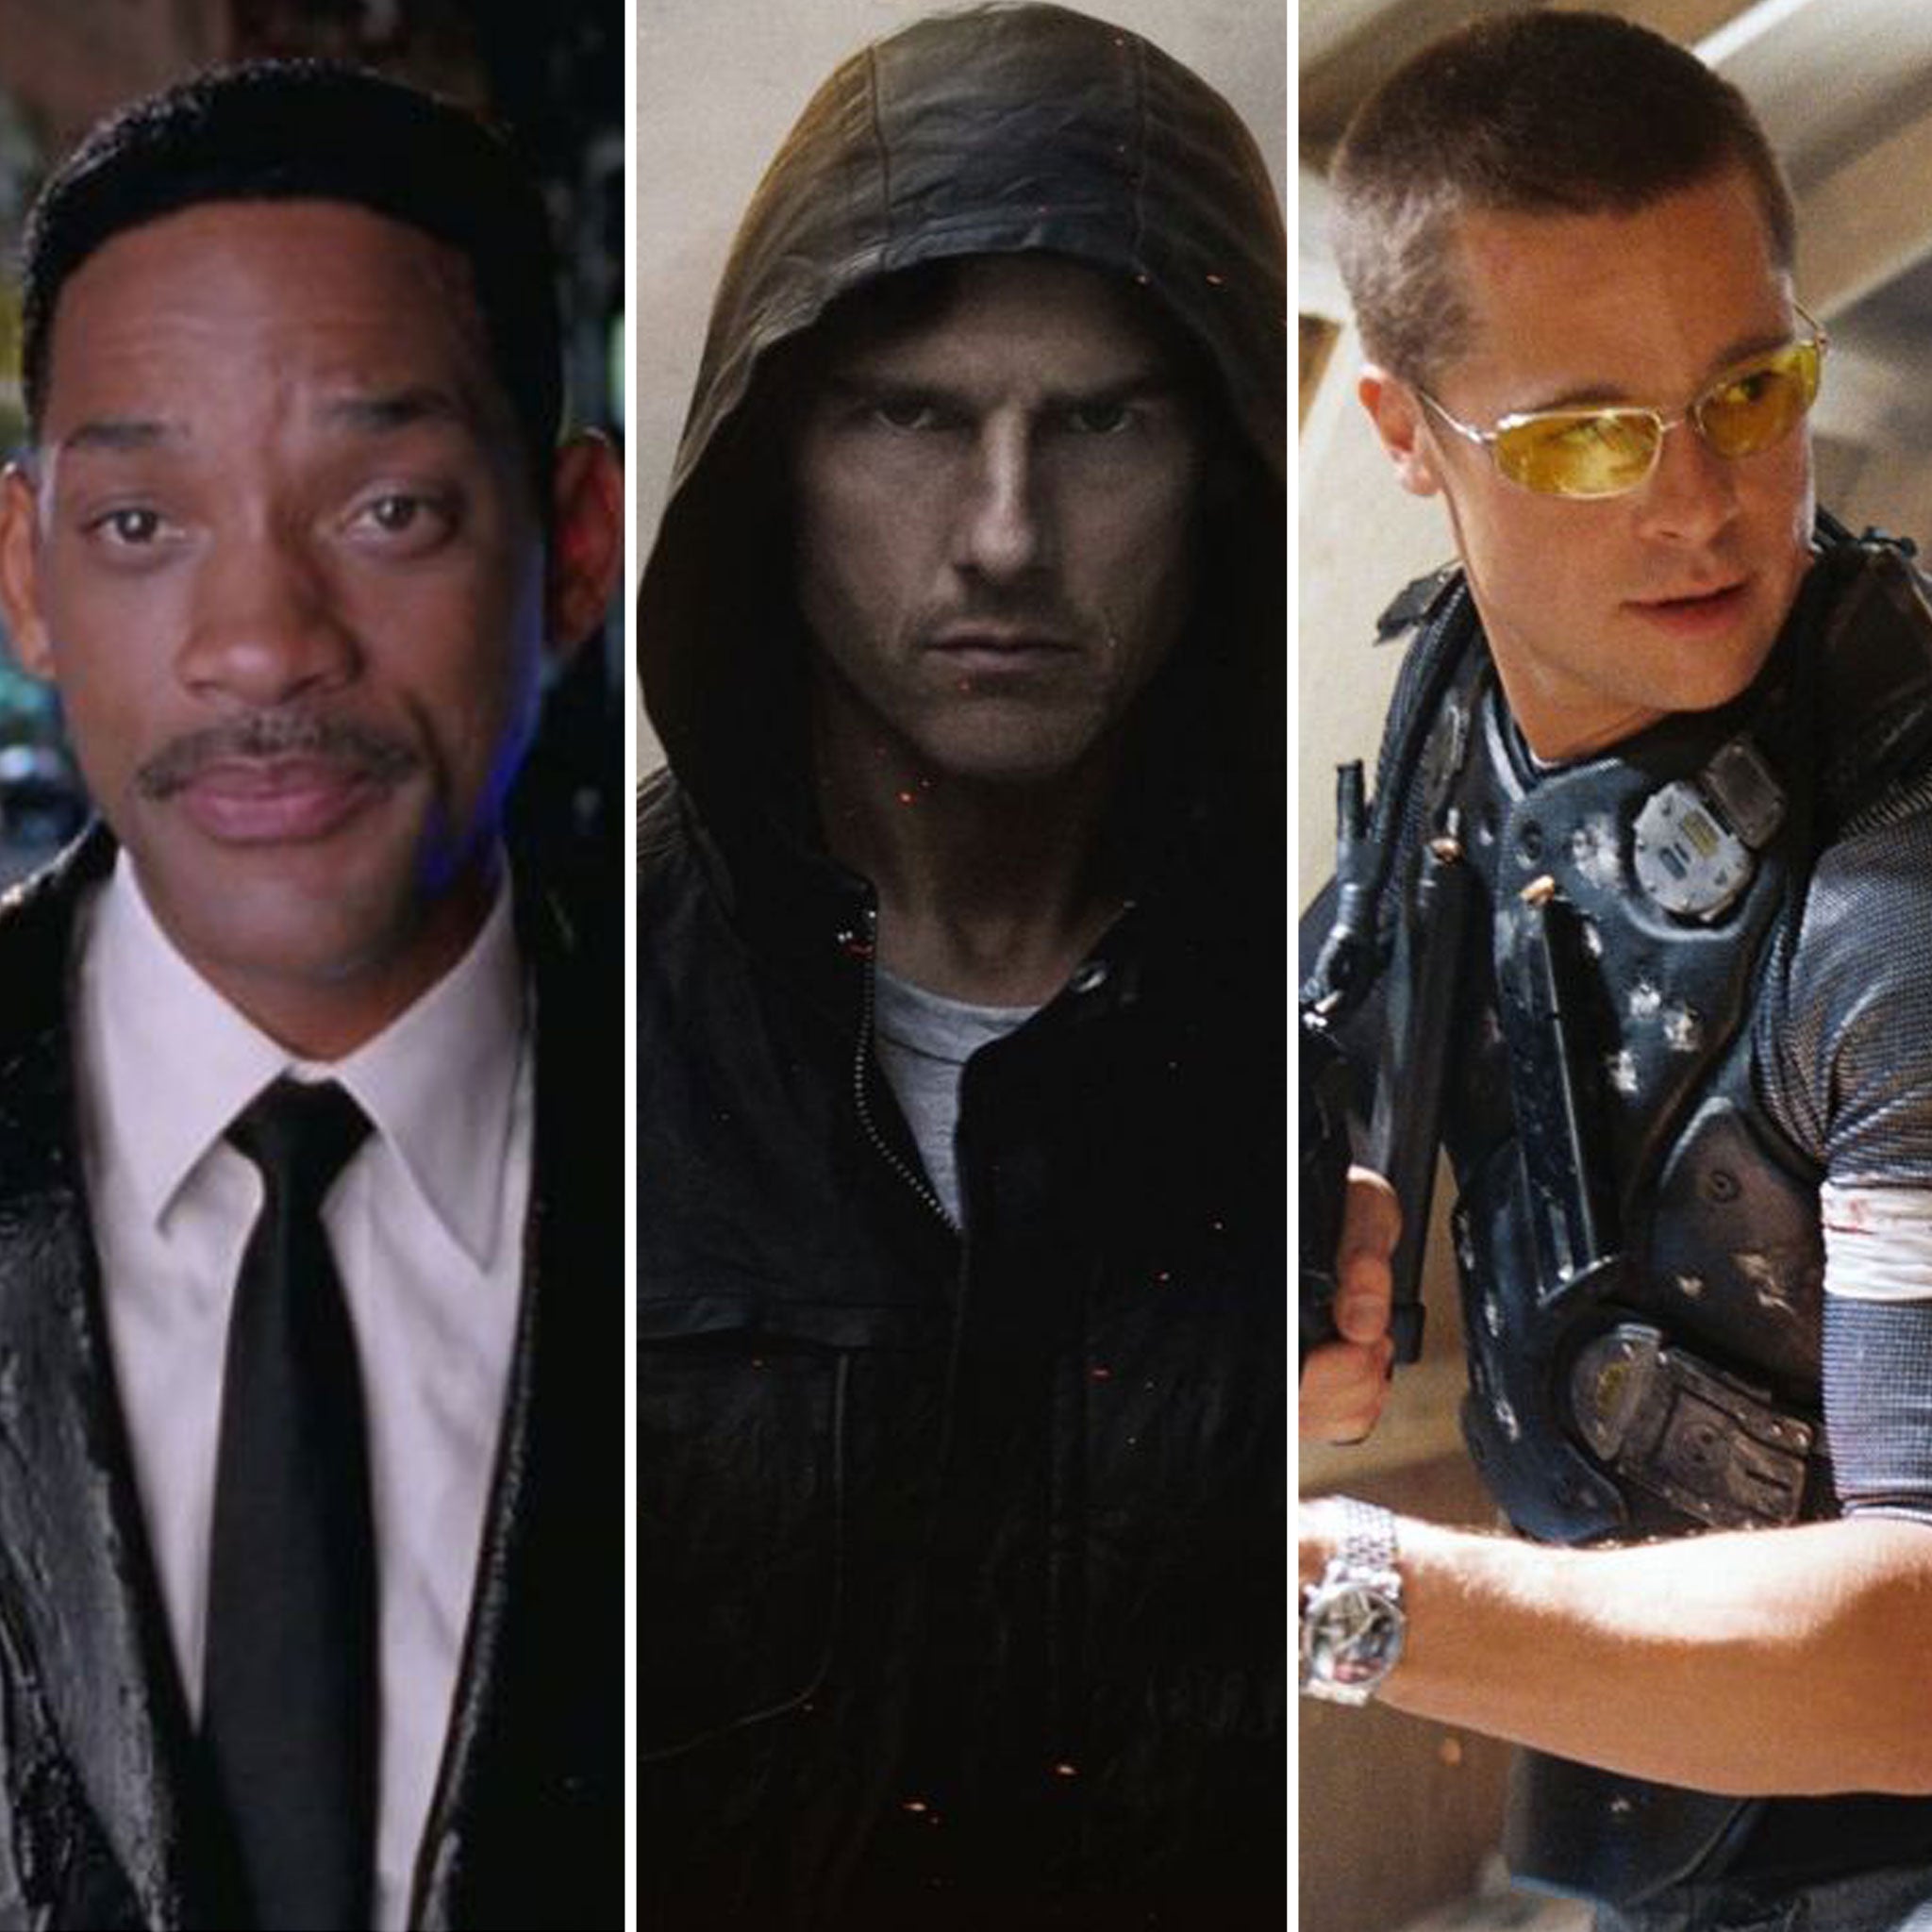 Have Will Smith, Tom Cruise and Brad Pitt lost their mojo?